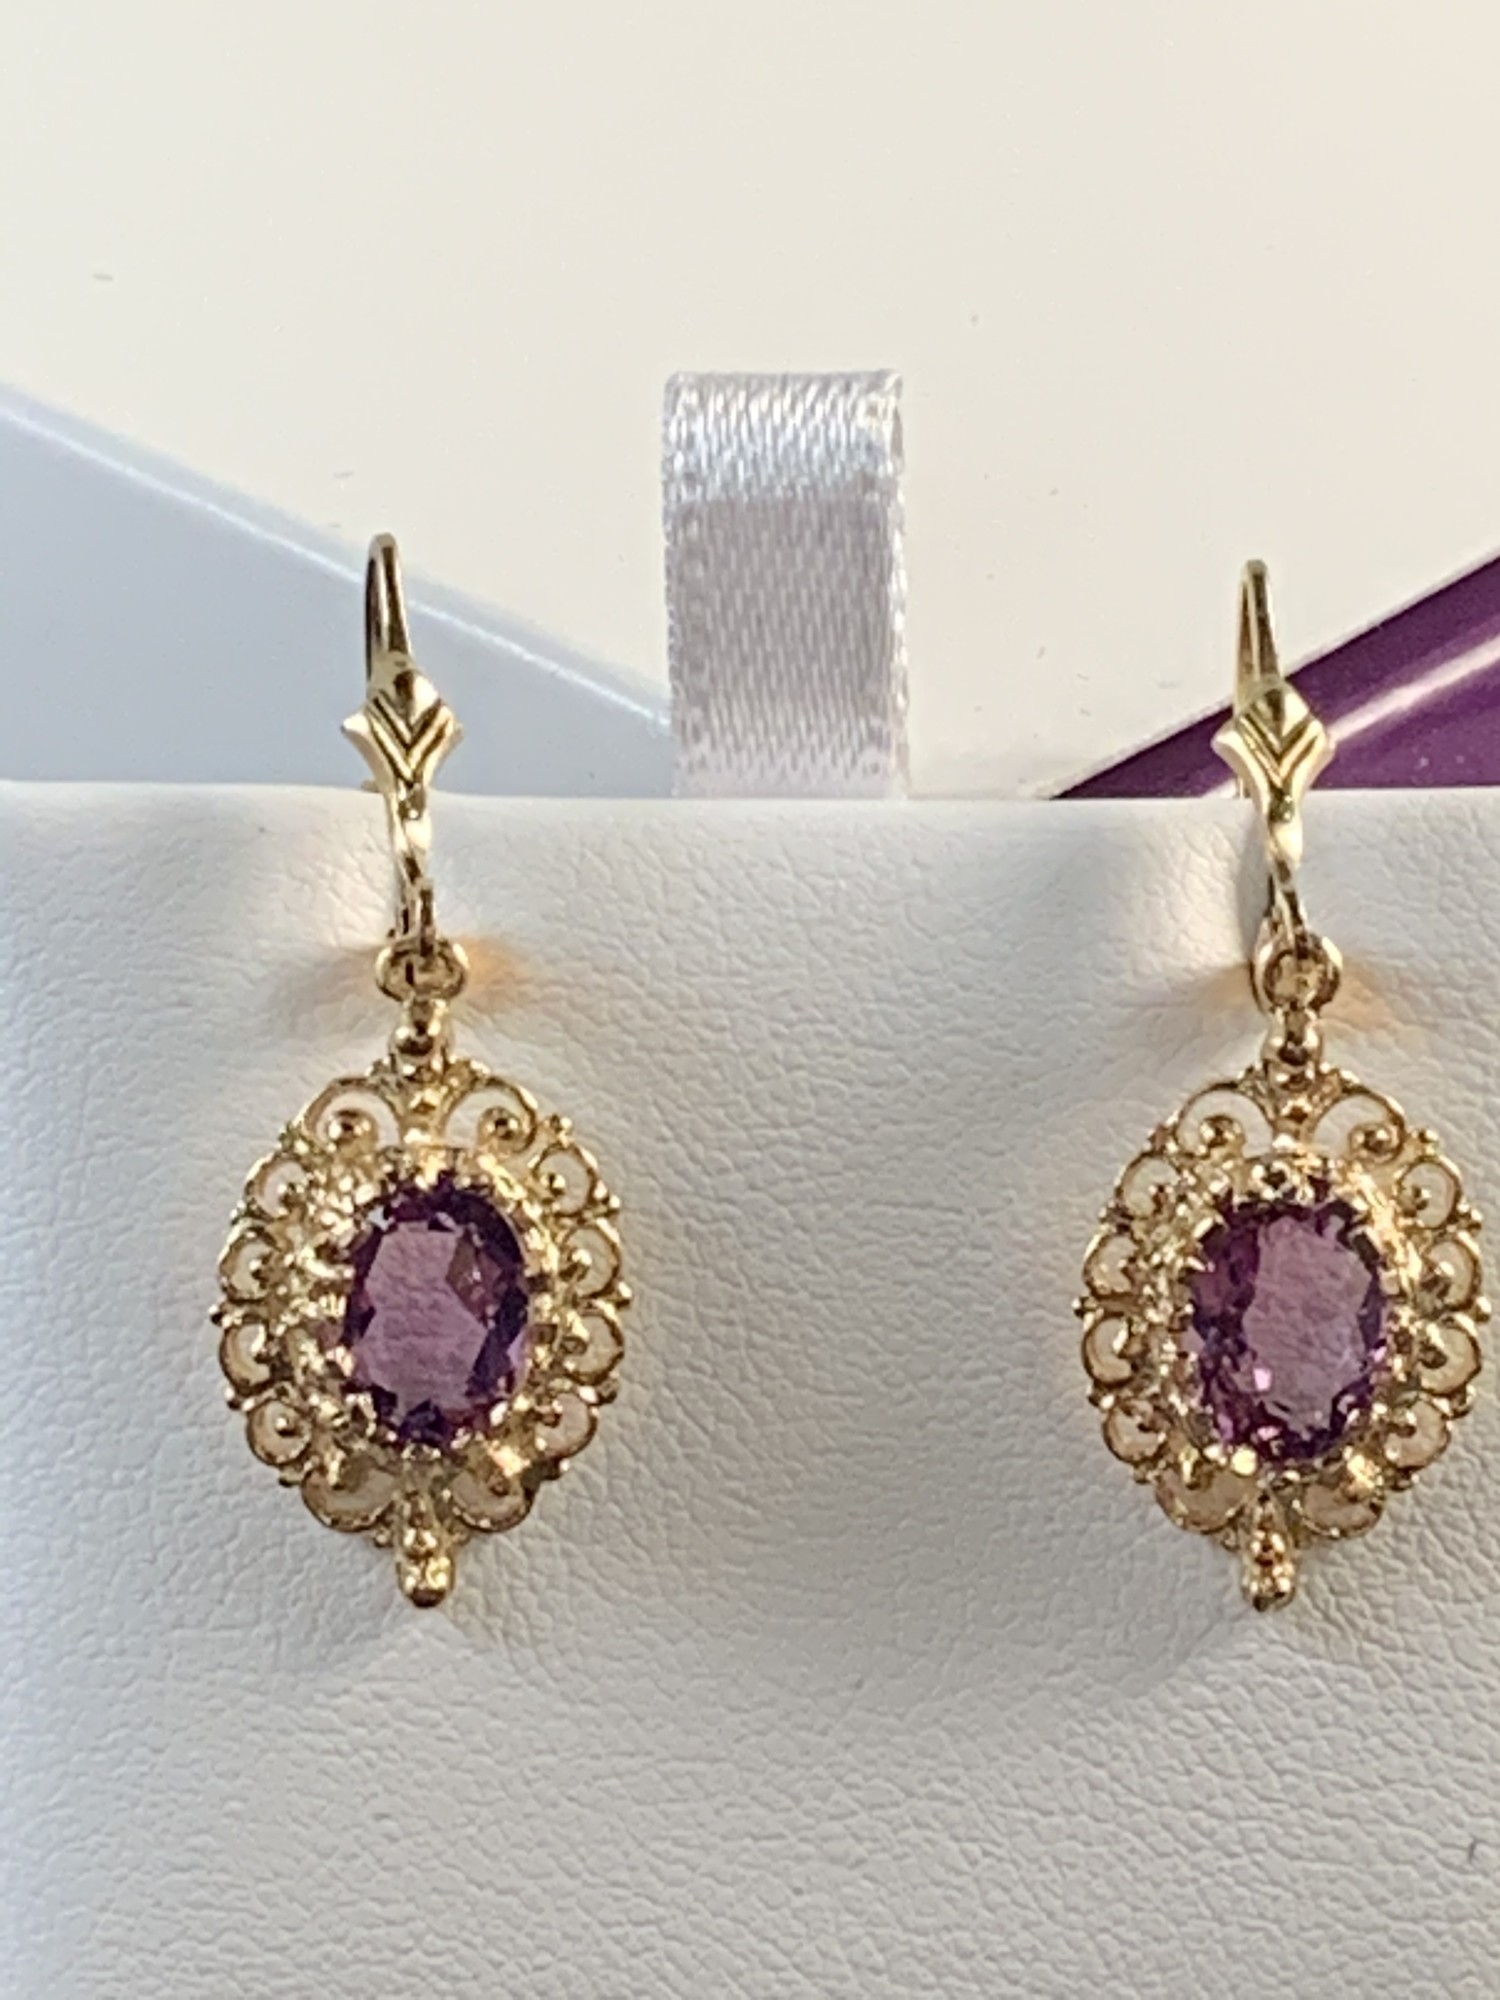 Oval Amethyst with Filigree Border Dangle Earrings
Lever back style. 8 x 6mm. Medium color.
$355